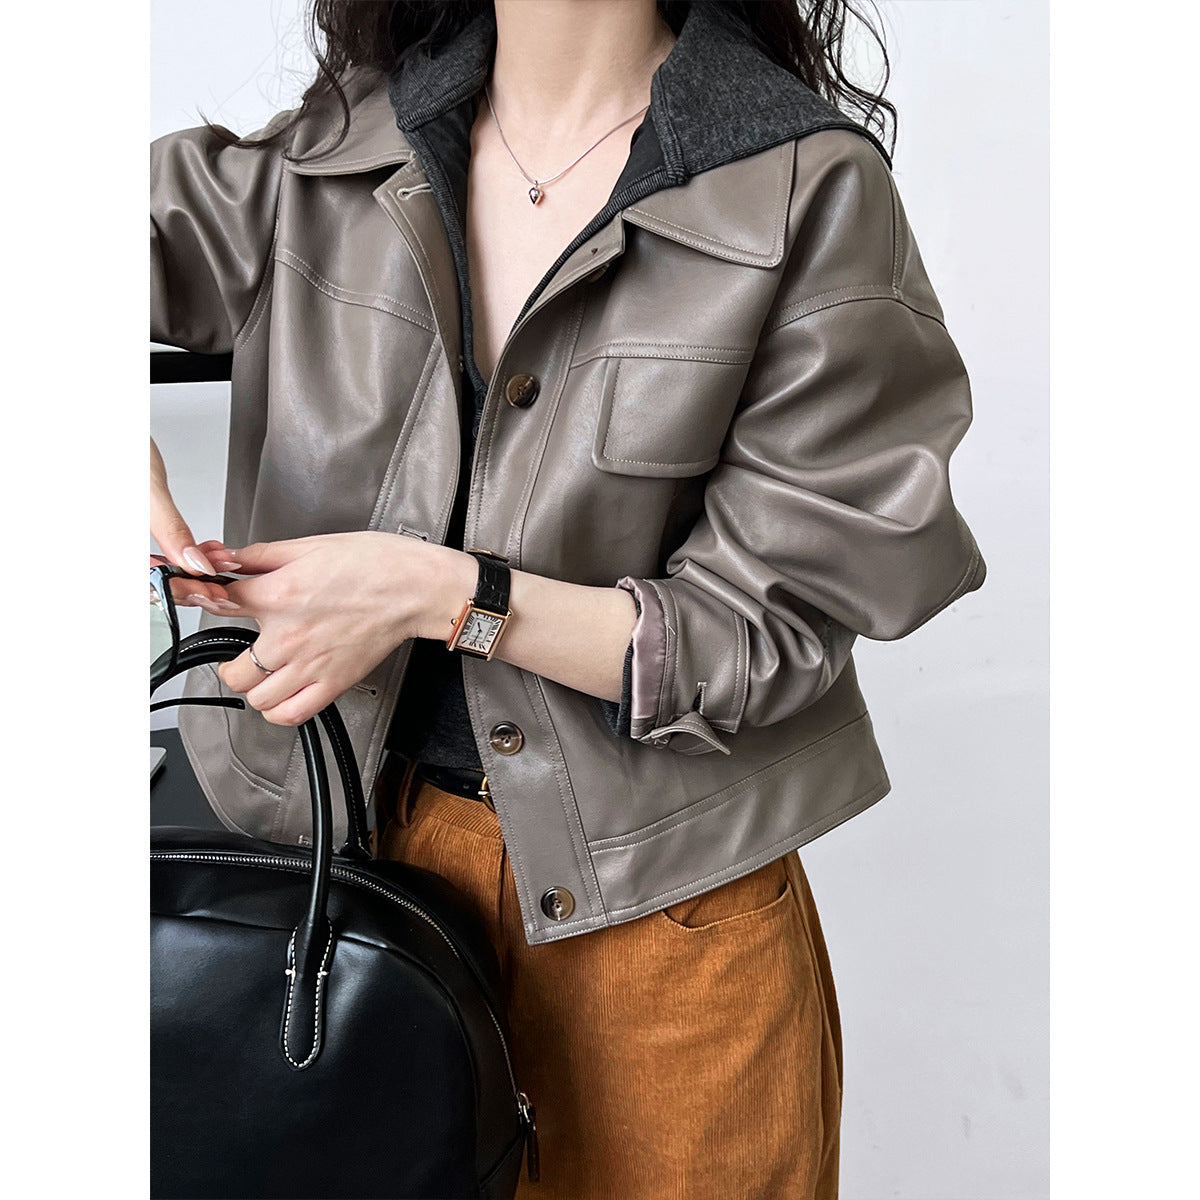 Classy PU Leather Motorcycle Jackets Coats